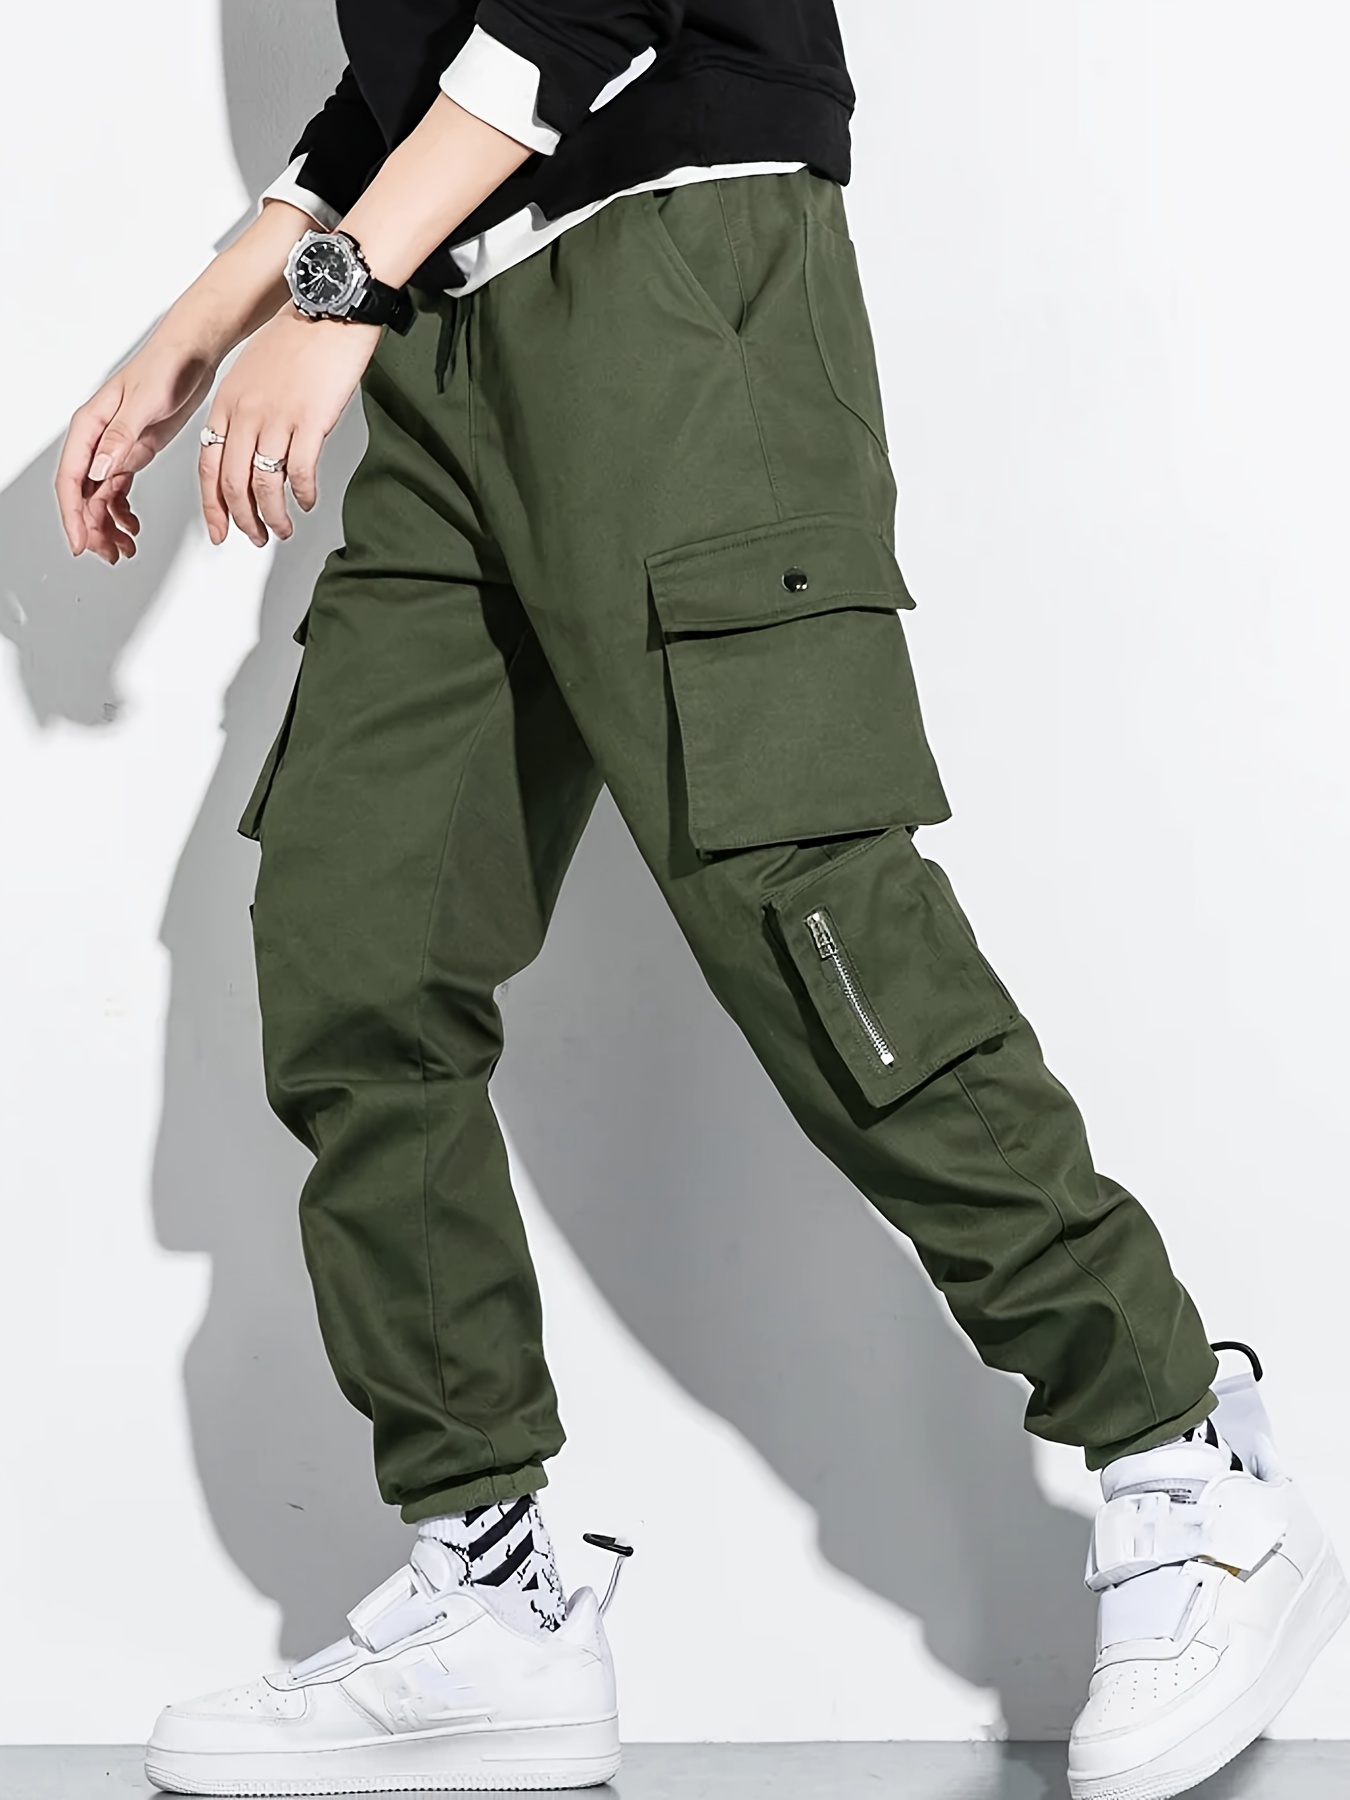 Men's Casual Pants Spring And Autumn Trend Of Elastic Multi-Pocket Cargo  Pants